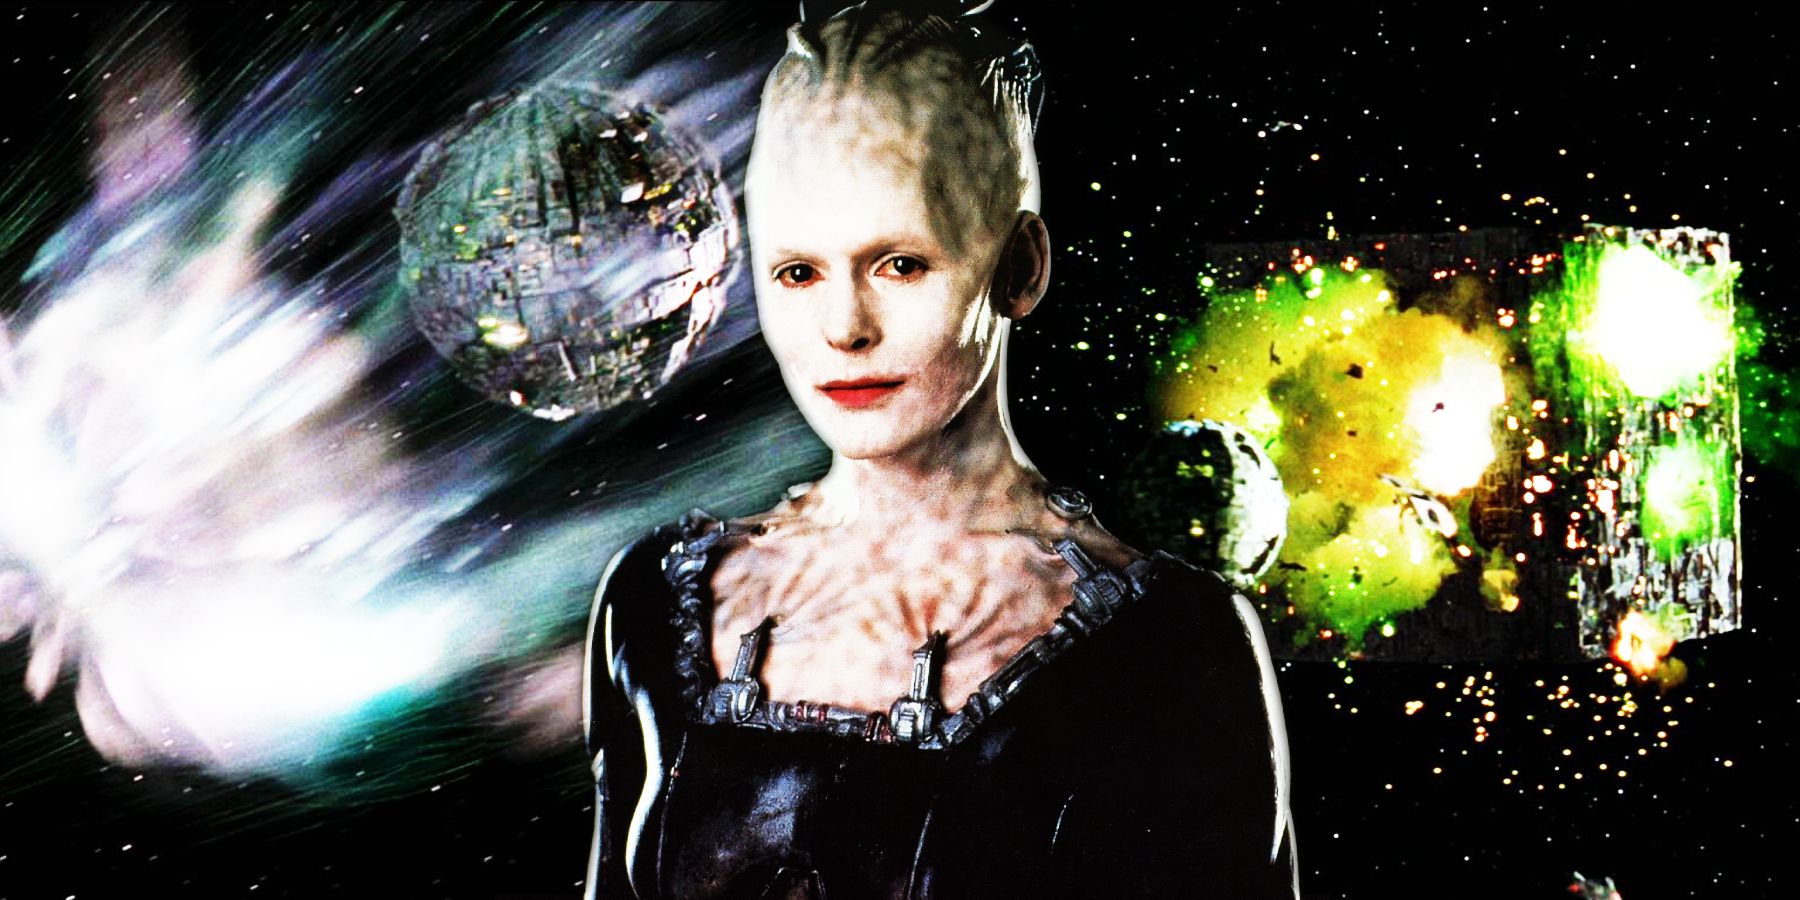 Star Trek's Borg Queen stands in front of two Borg space ships